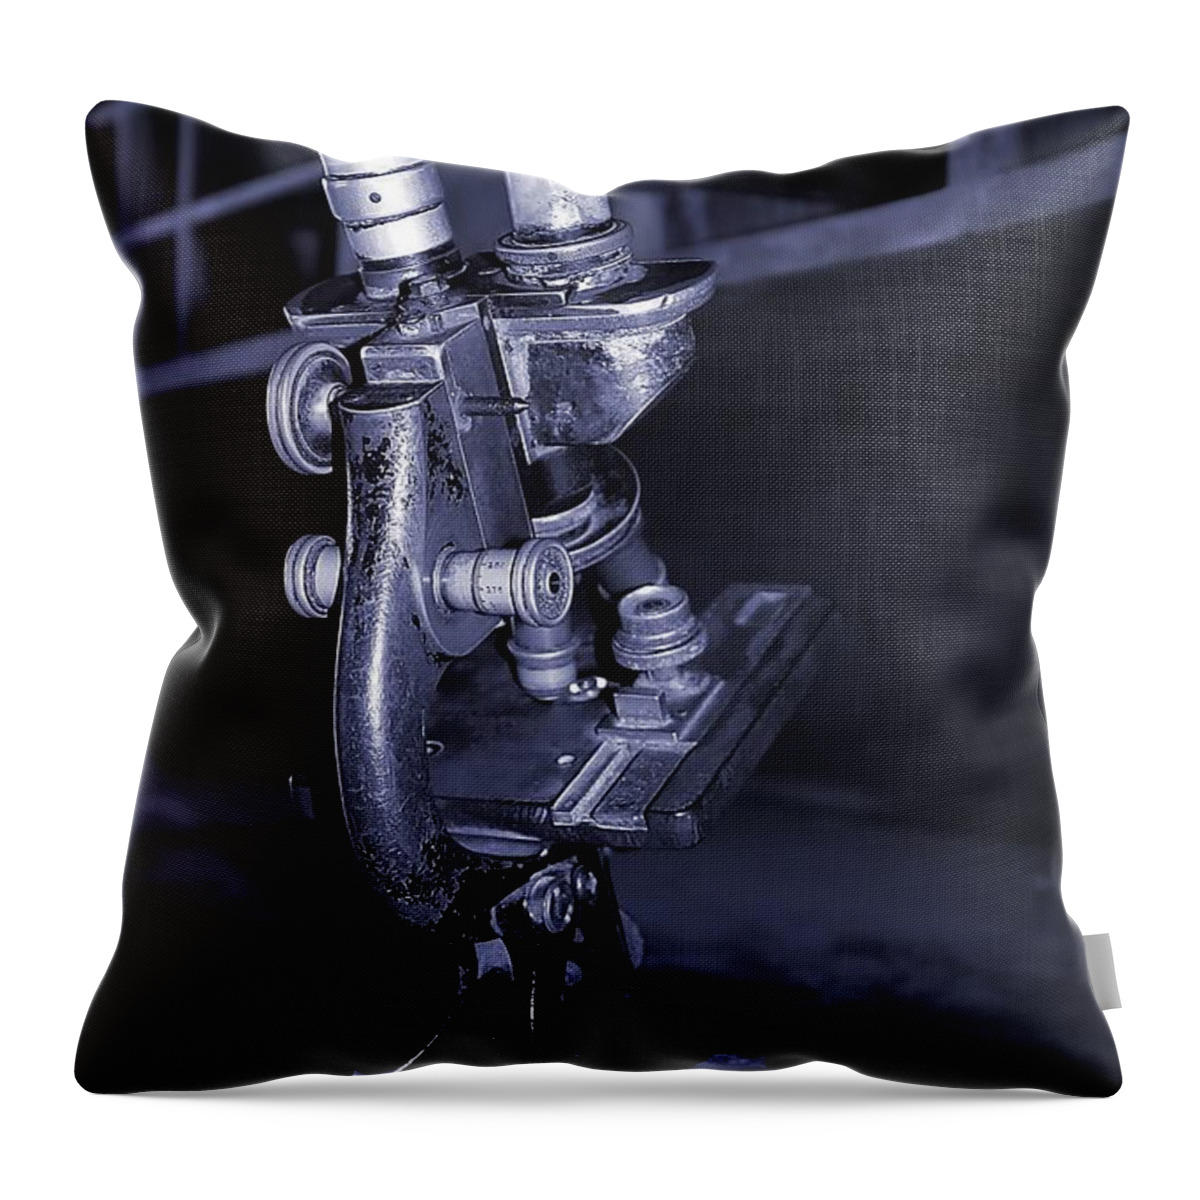 Old Throw Pillow featuring the photograph Old Microscope #1 by Henrik Lehnerer